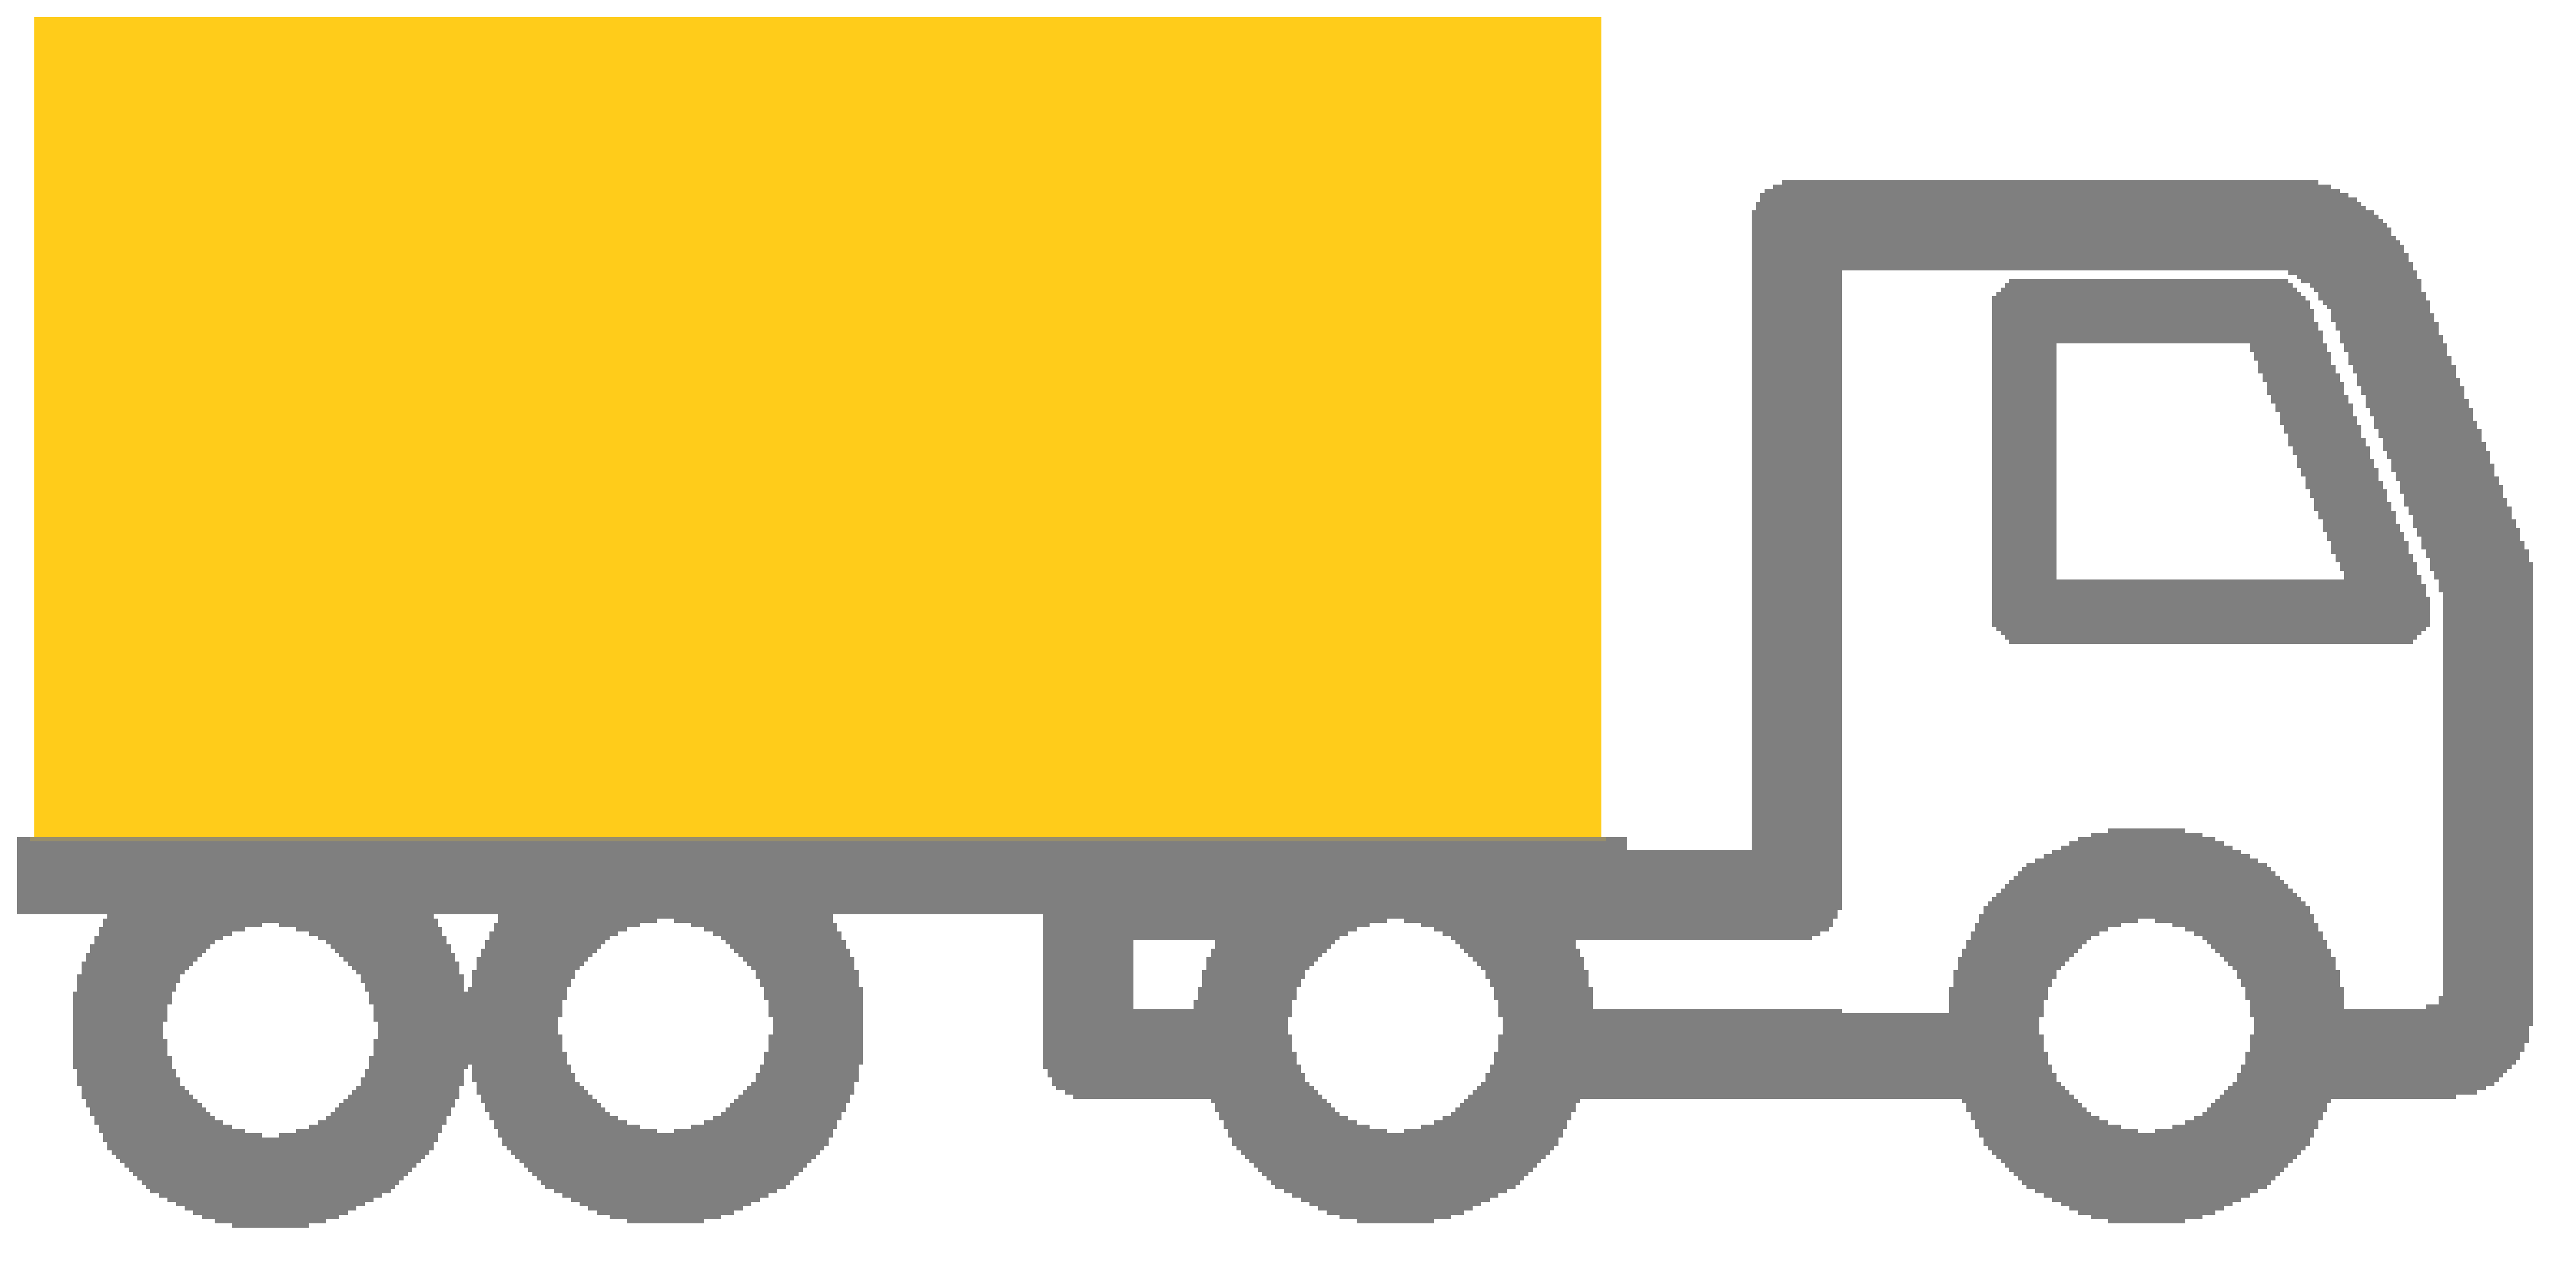 An icon of a truck carrying a yellow container.